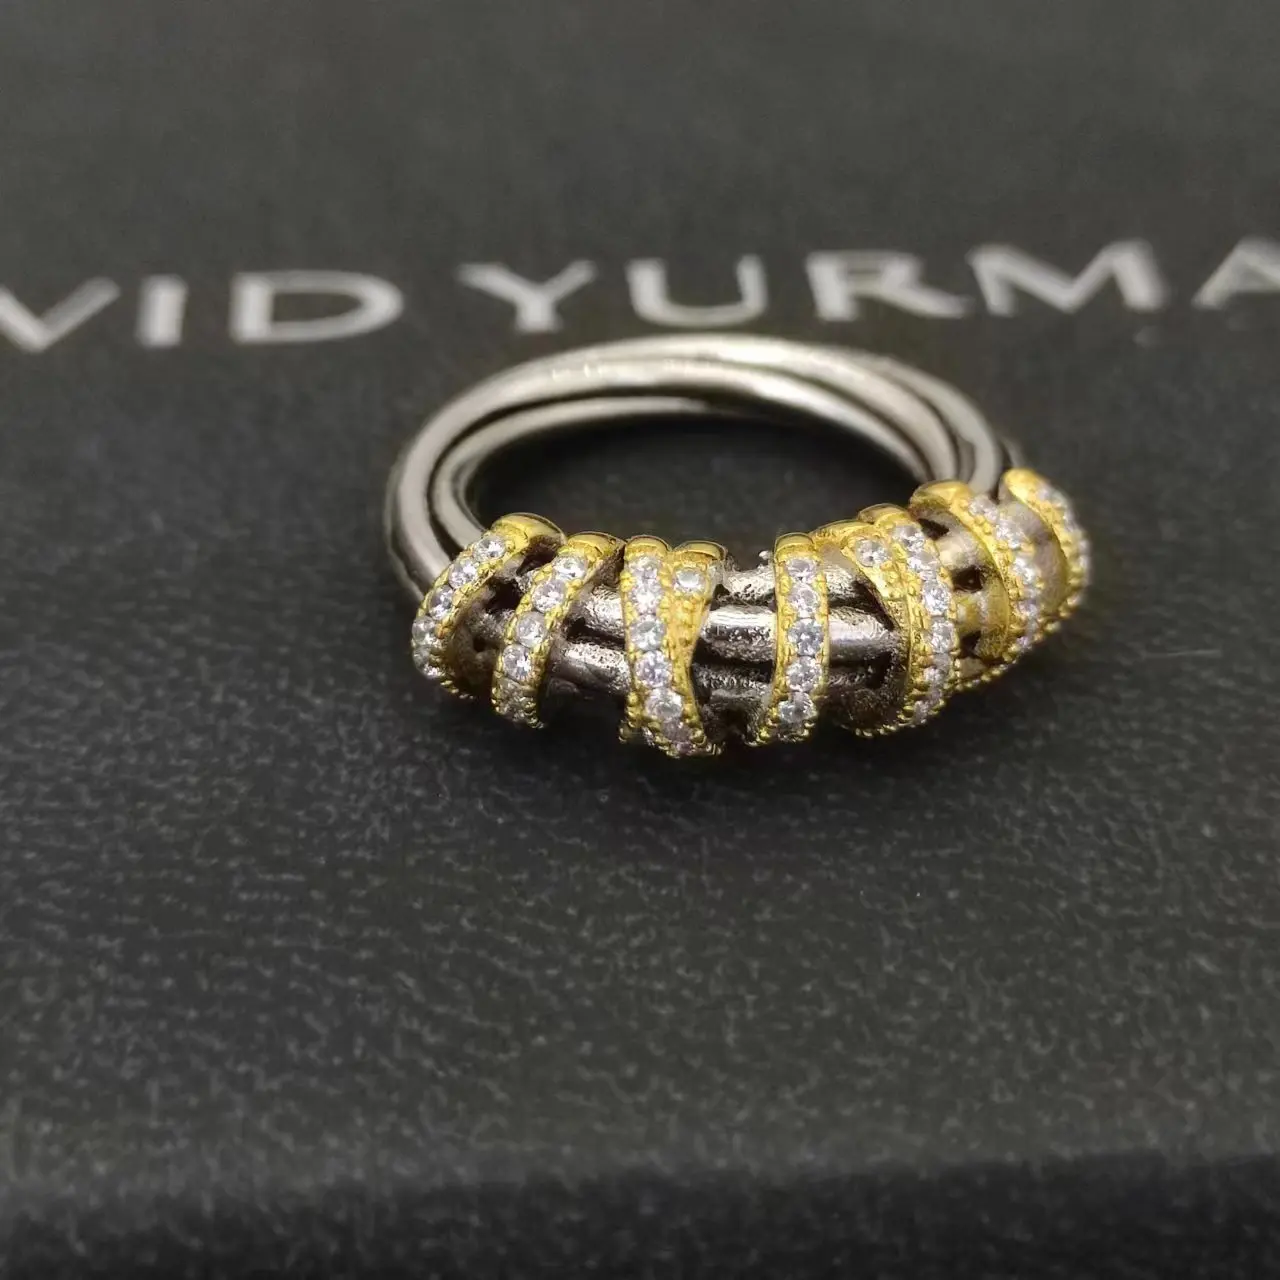 

High Quality David Yurman Women's Rings Petite Infinity Band Ring in Sterling Silver with Pavé Diamonds Women's Popular Charm